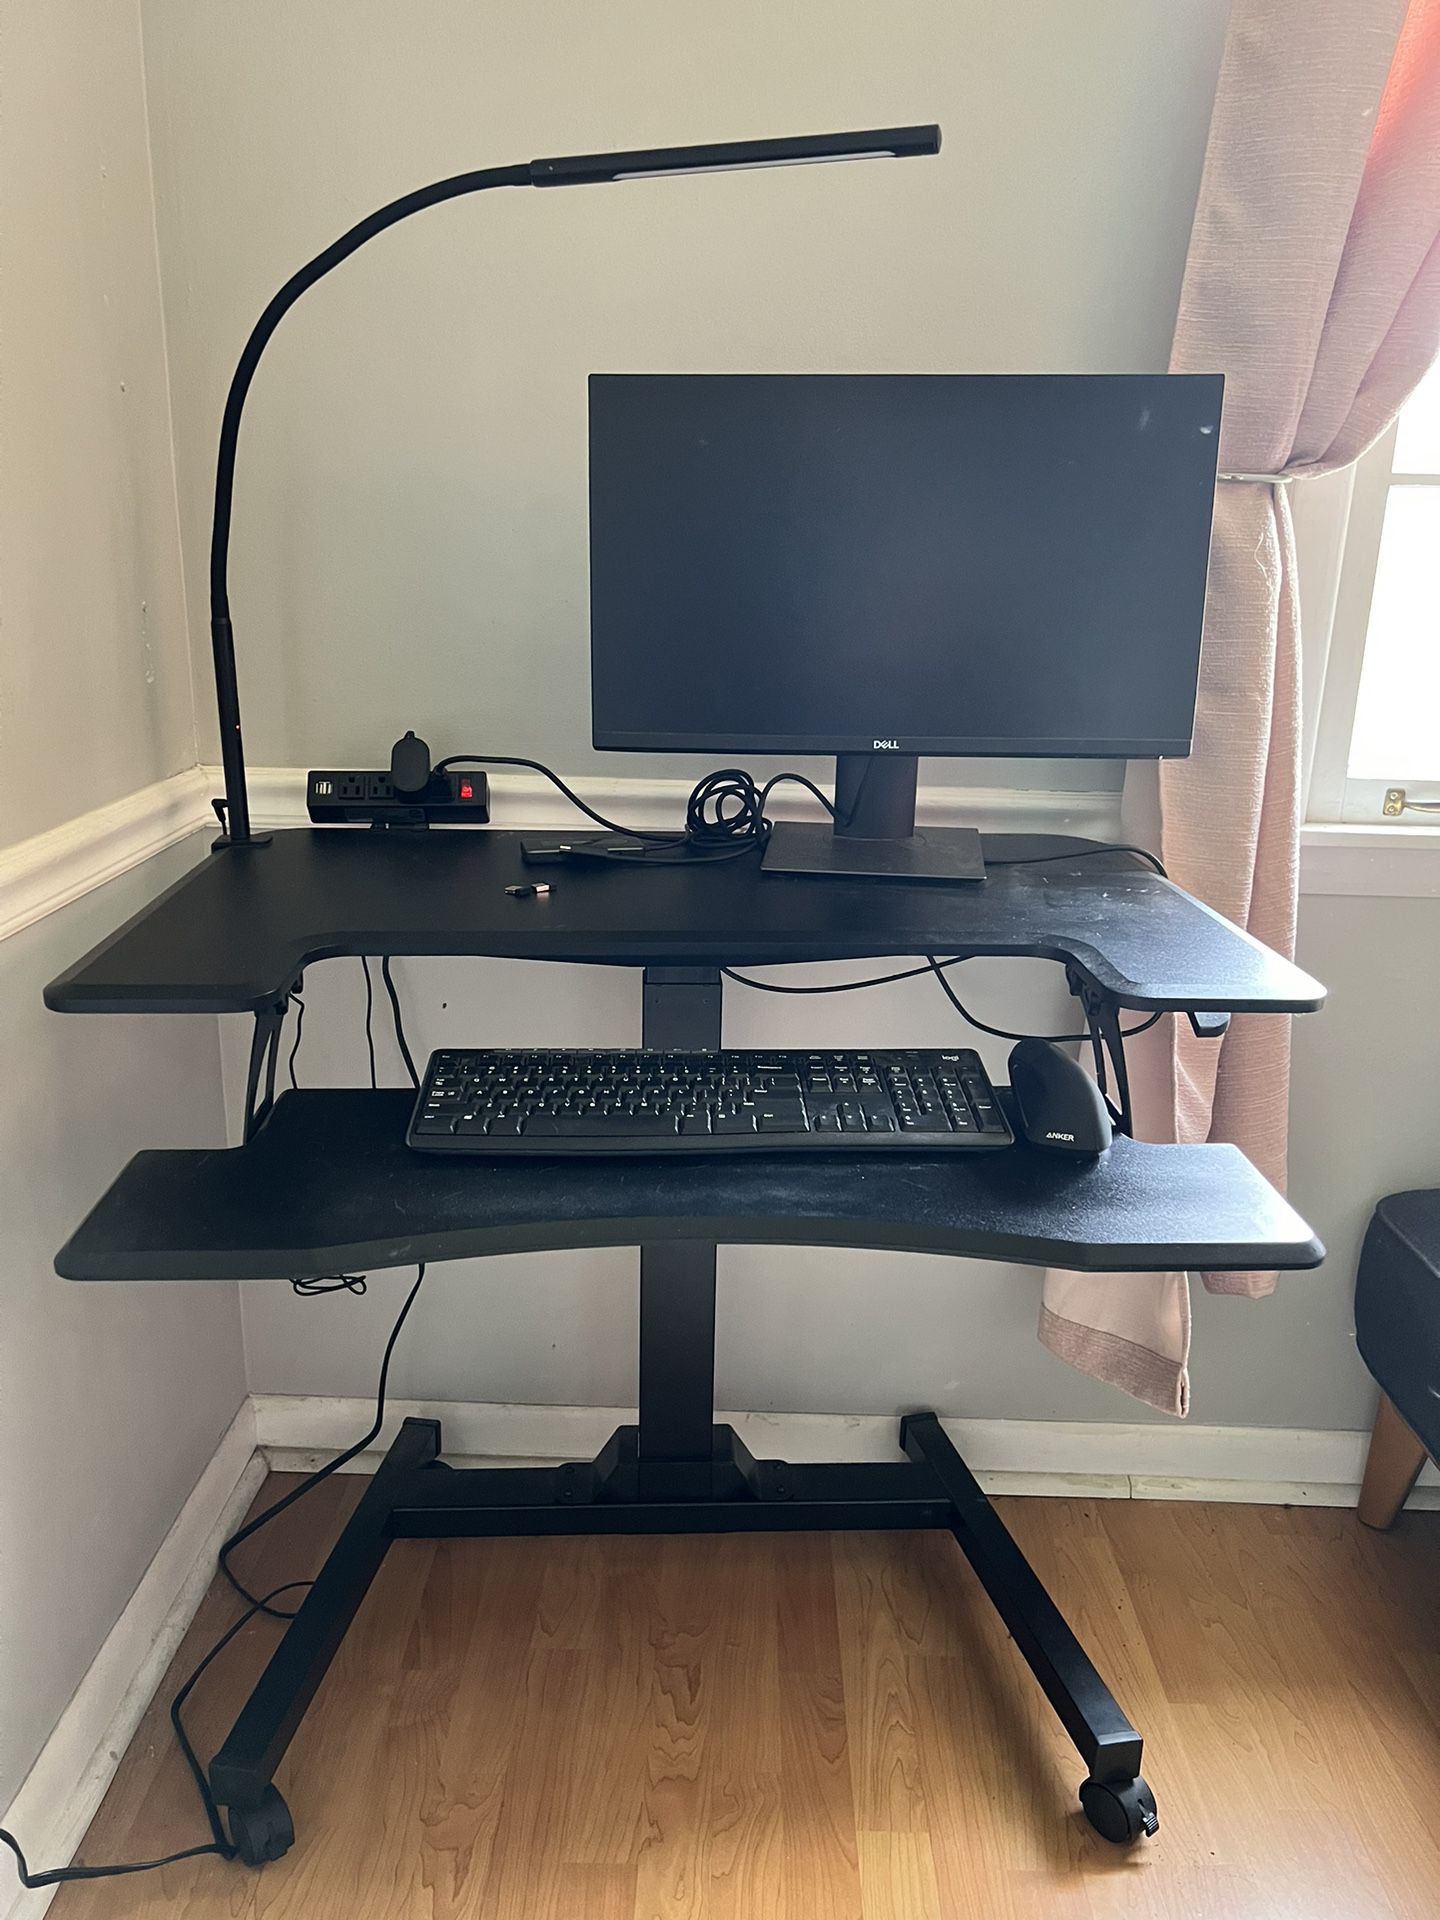 PRICE DROP! Complete Home Office Setup